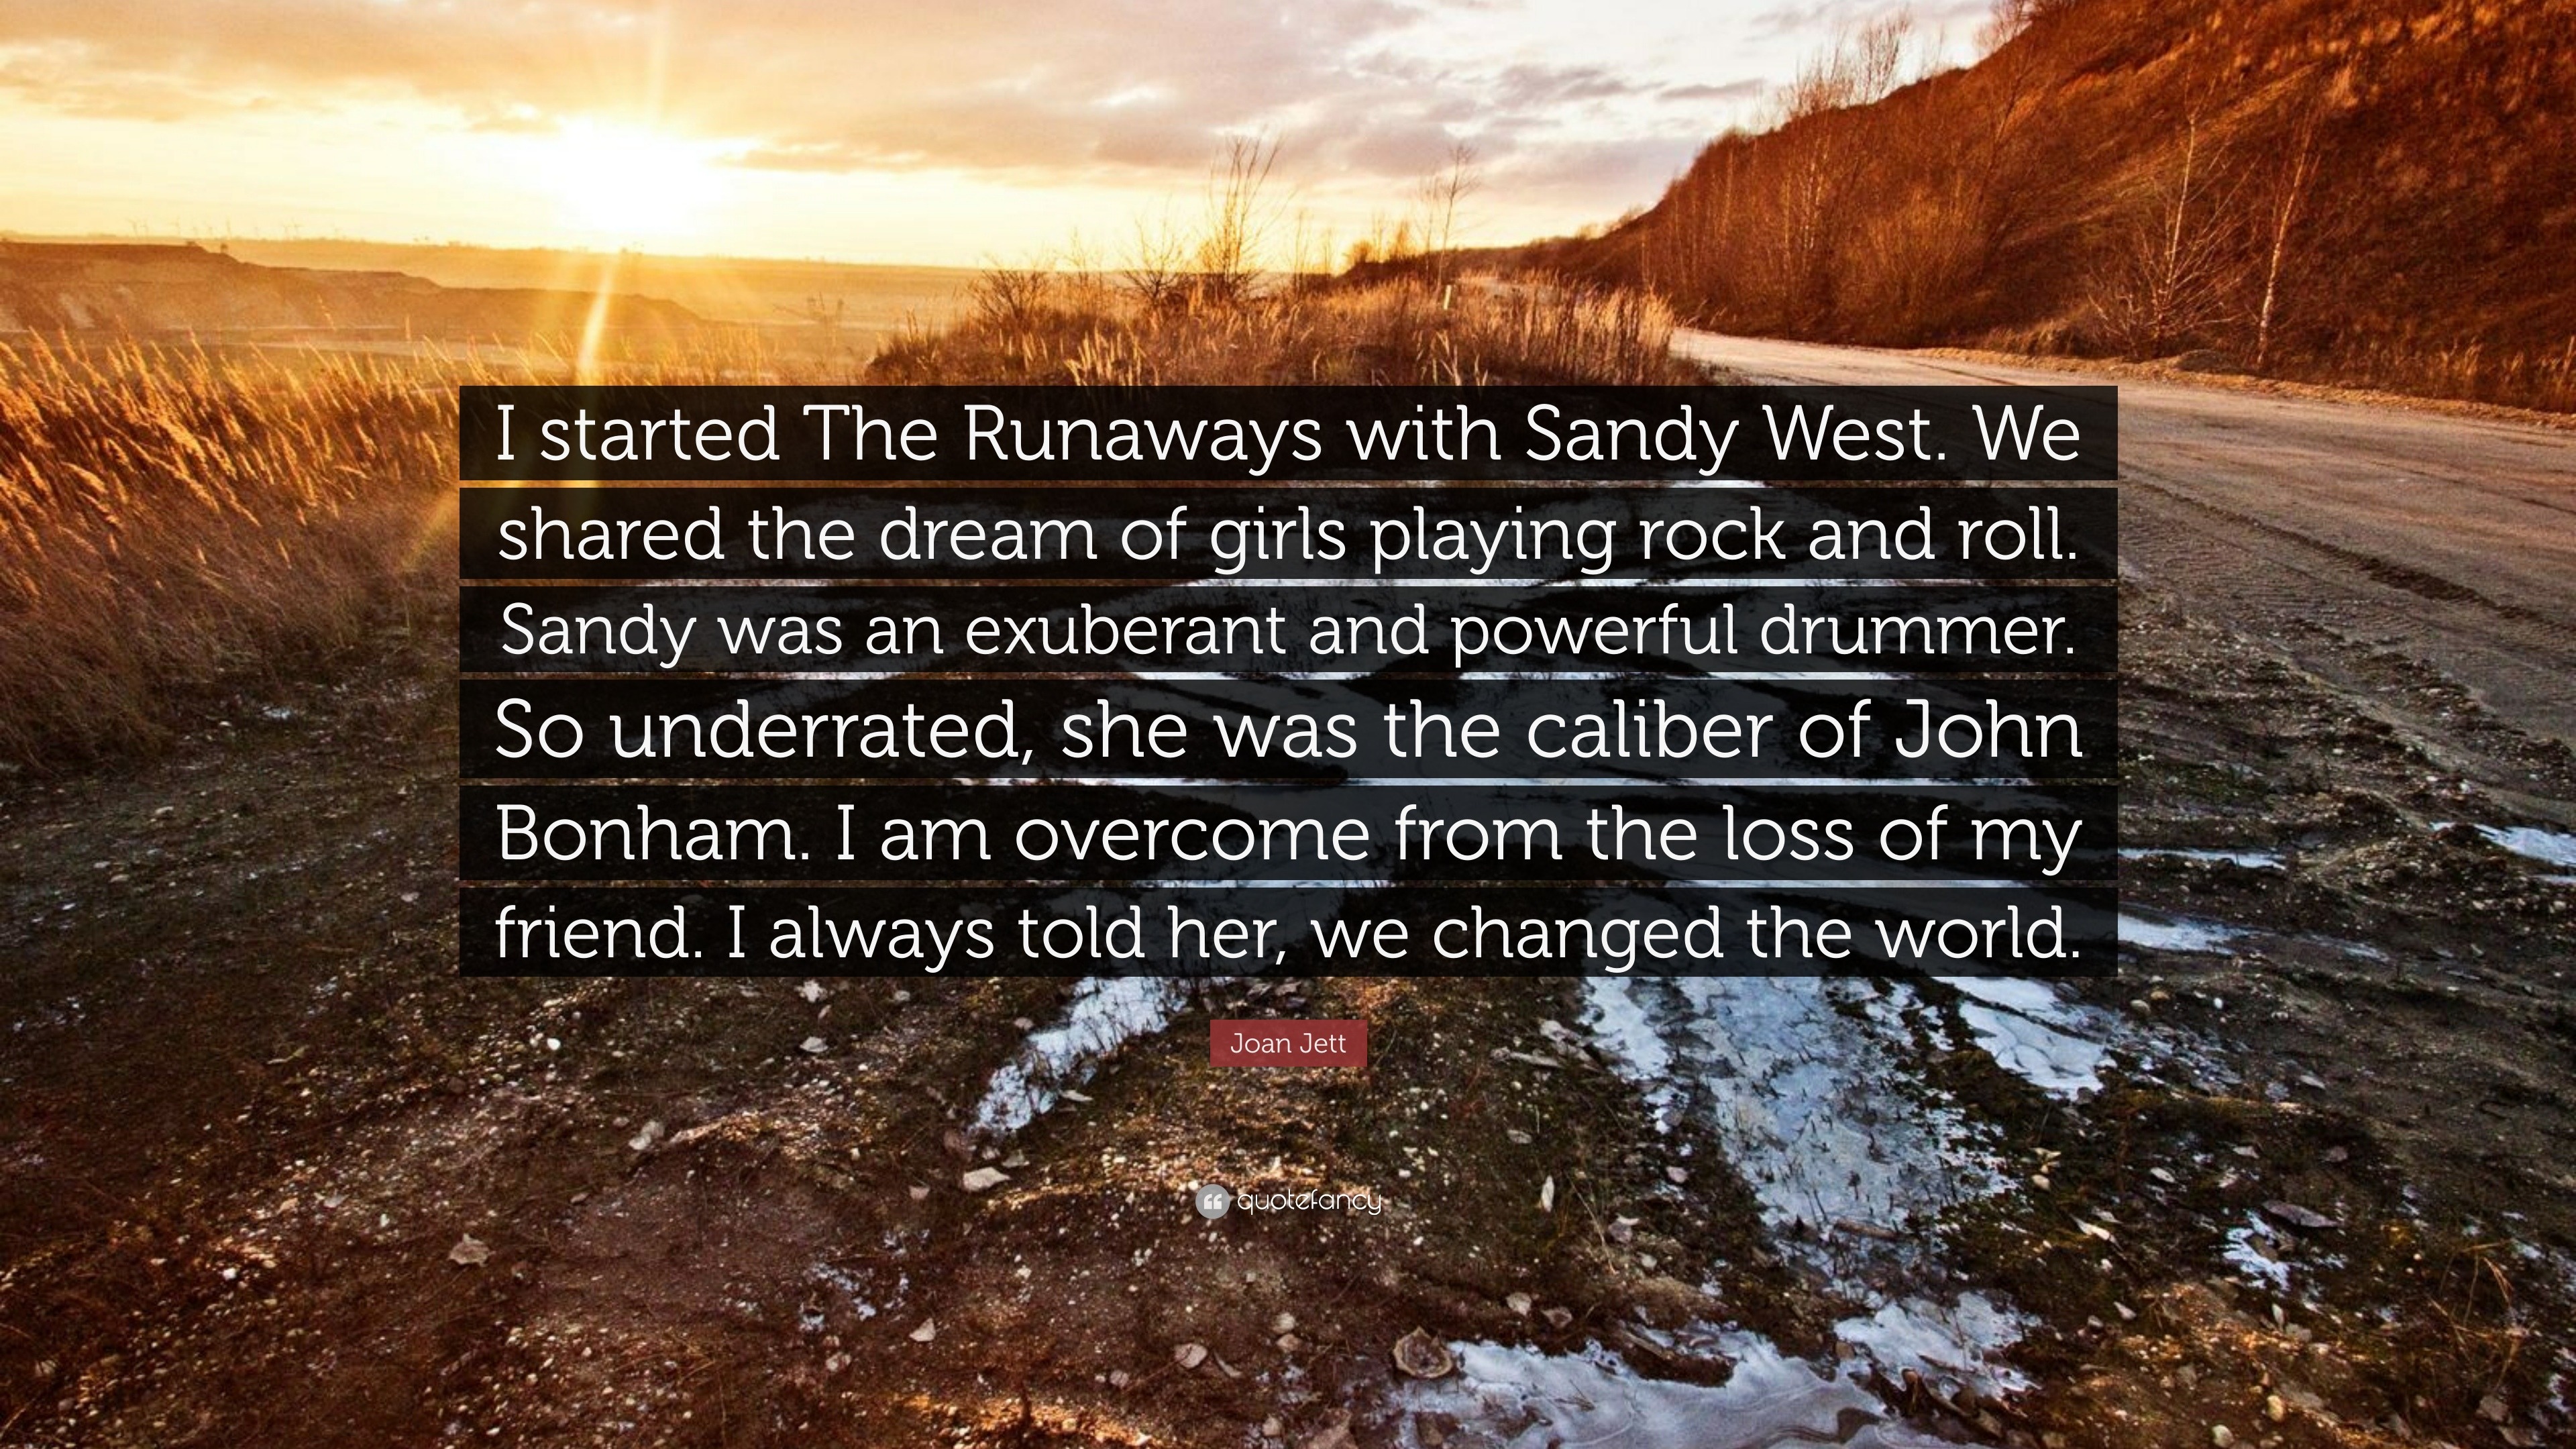 Joan Jett Quote I Started The Runaways With Sandy West We Shared The Dream Of Girls Playing Rock And Roll Sandy Was An Exuberant And P